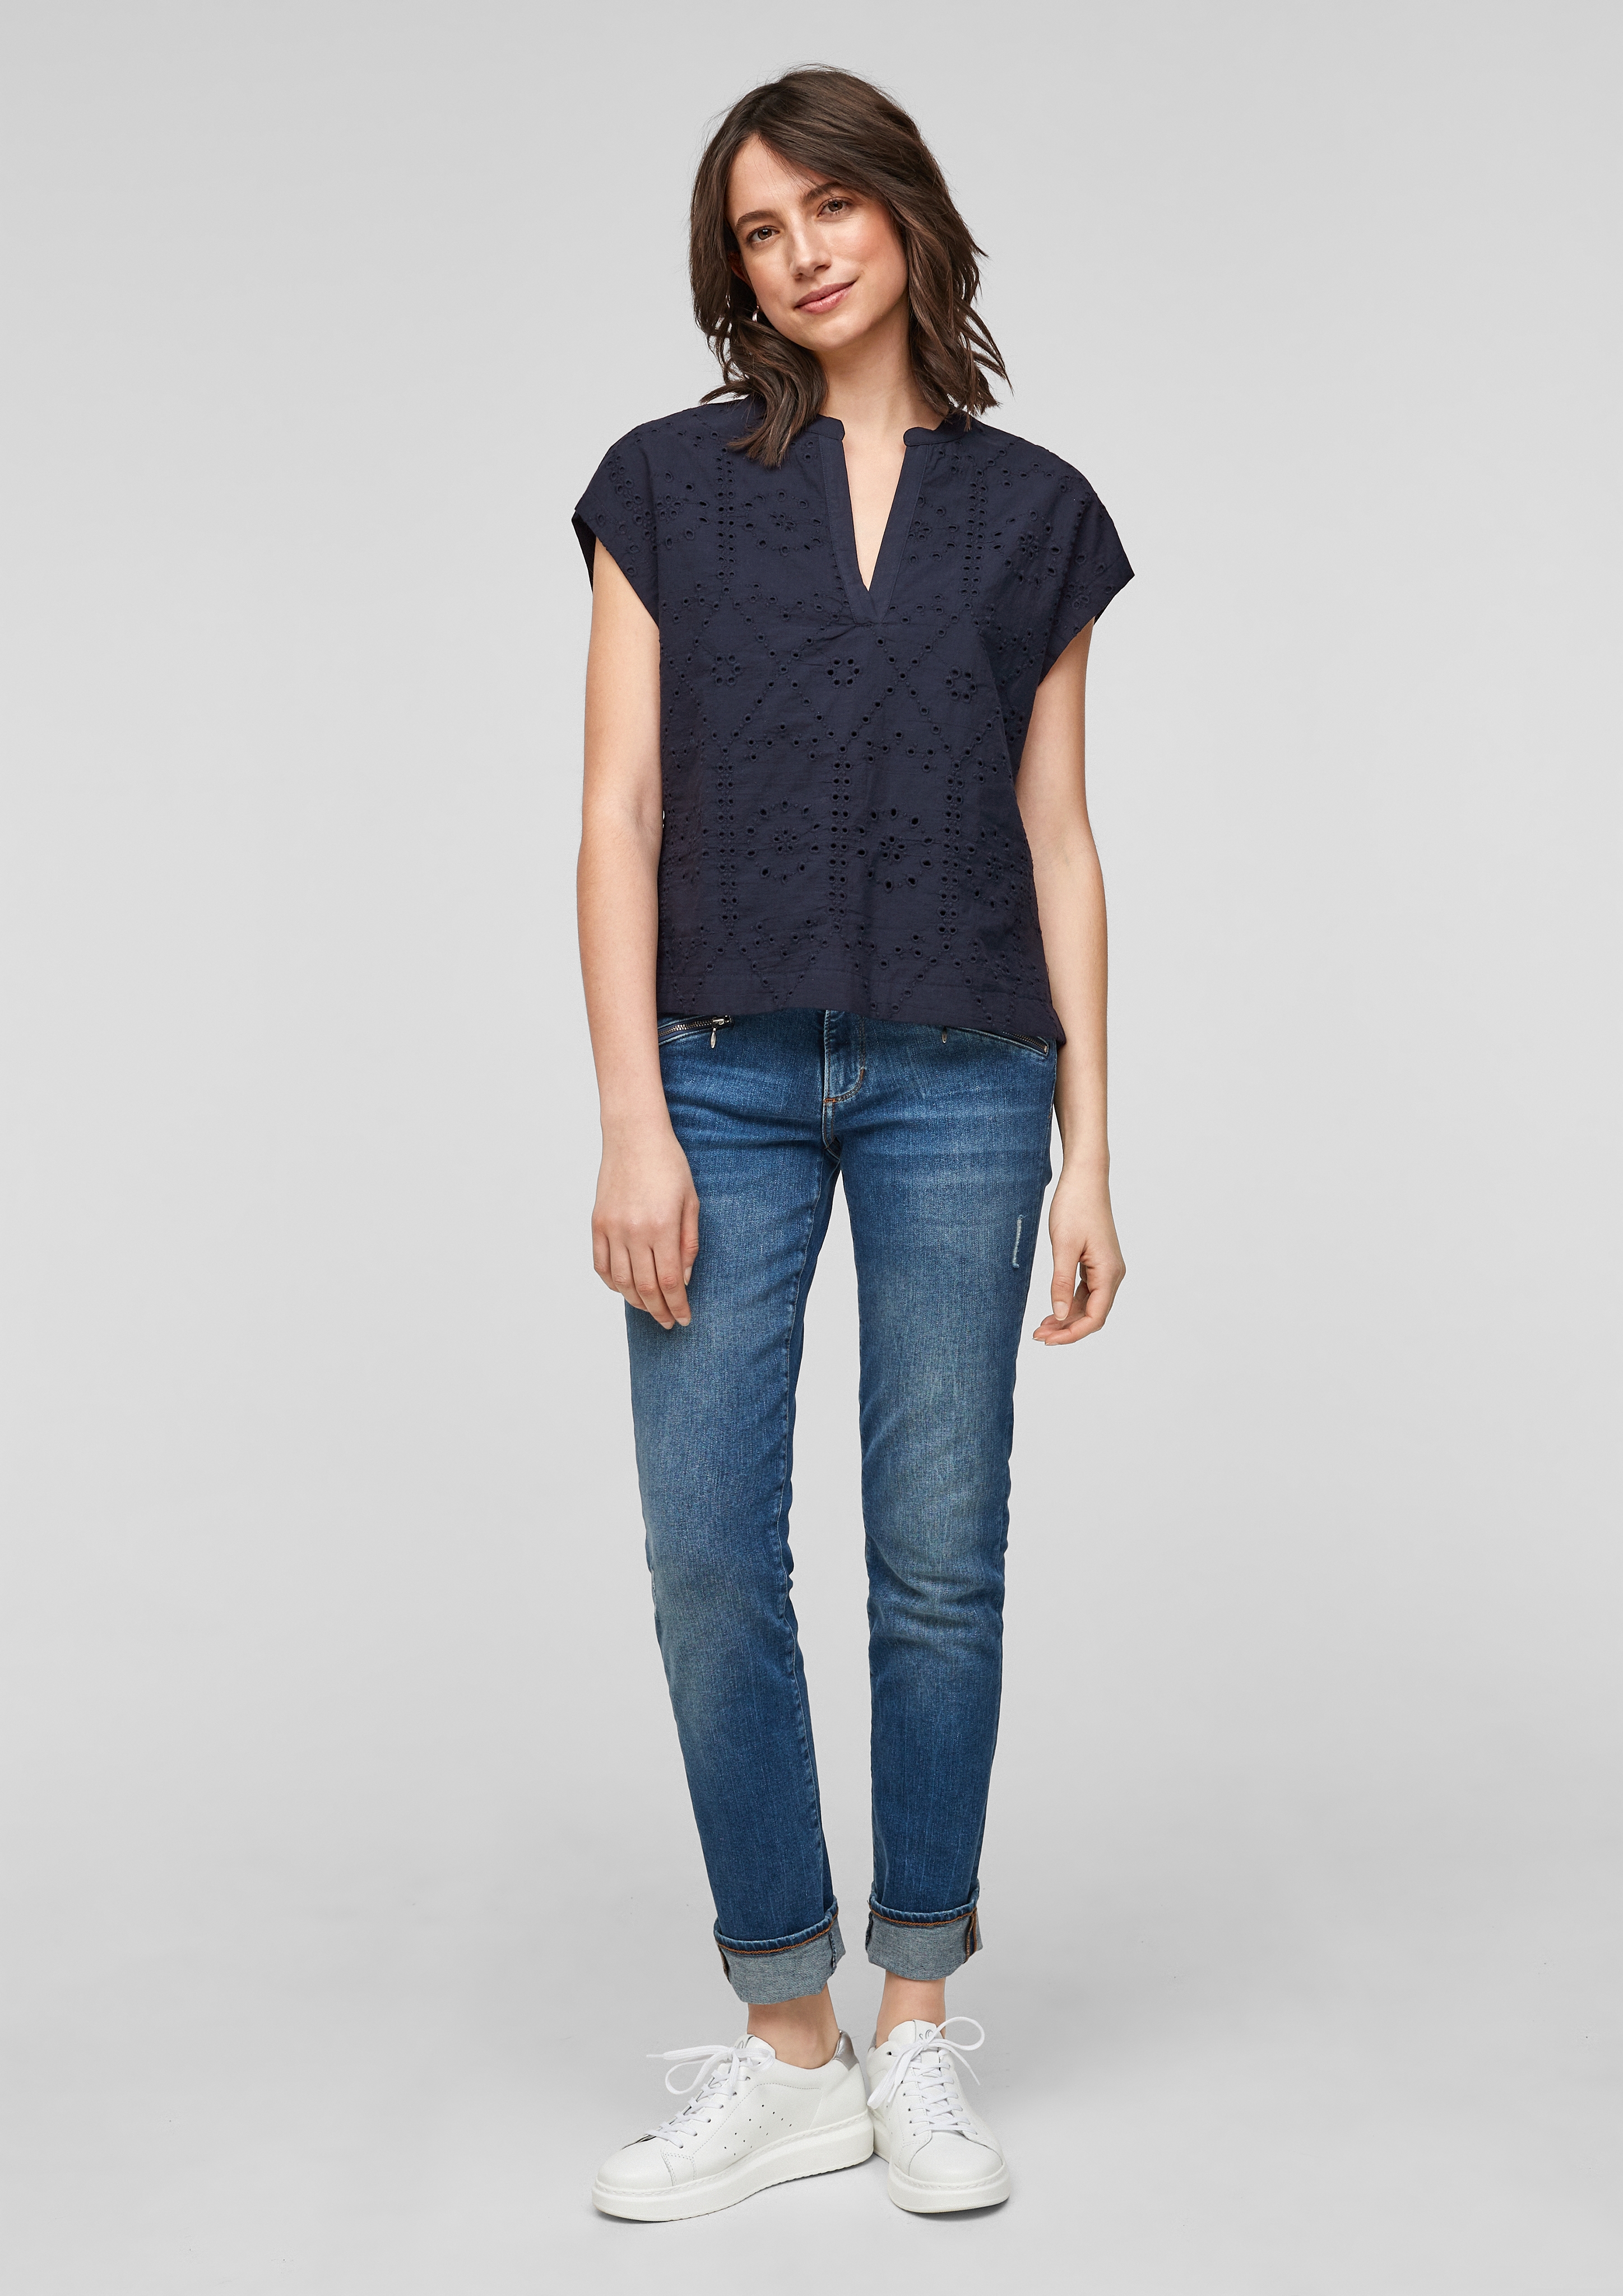 s.Oliver Shirt in Navy 